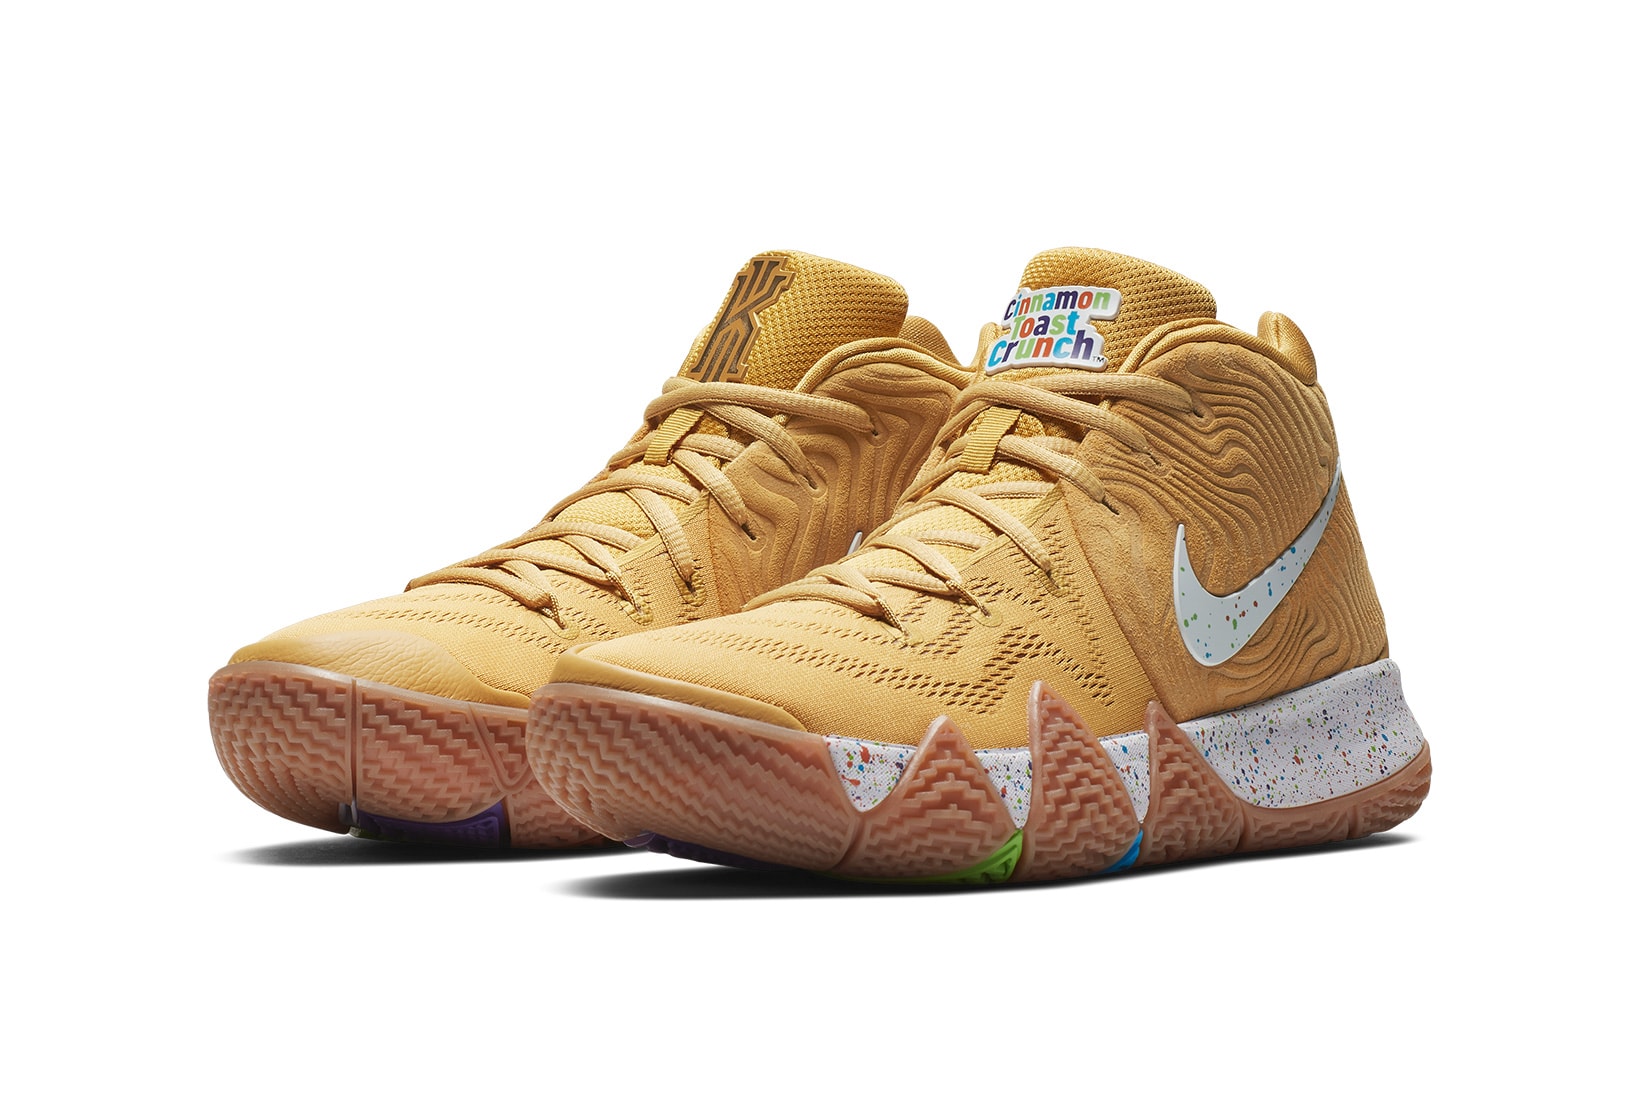 NEW Nike Kyrie 4 Kix Cereal Pack Irving Yellow 2018 RARE BV0425-700 Size  13.5